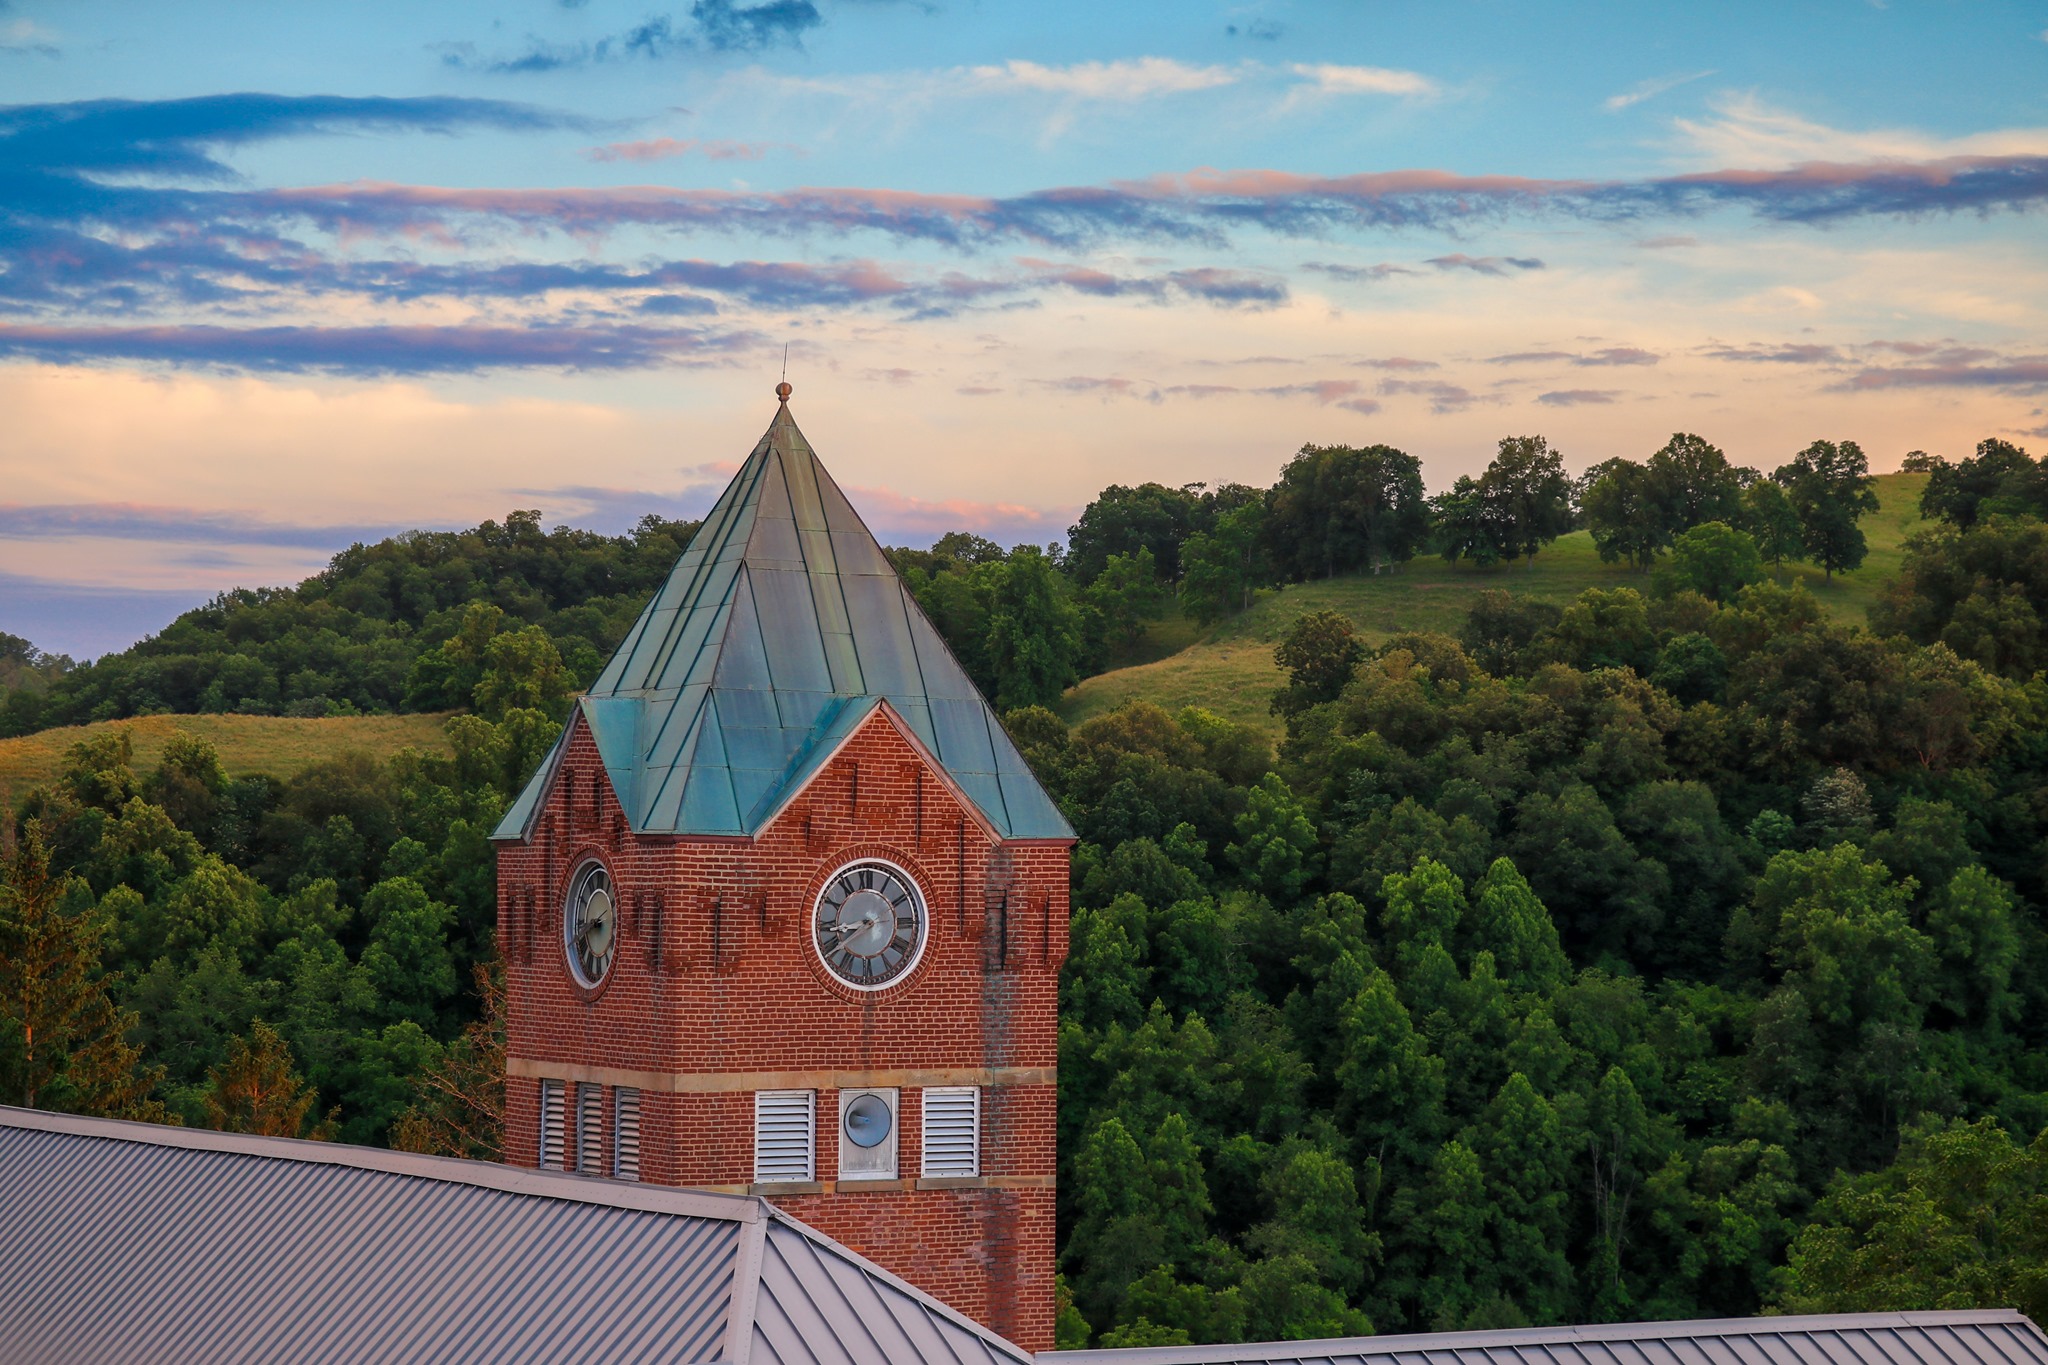 The GSC Clock Tower stands tall in front of rising green hills speckled with trees and meadows. It is dusk, and the sky shifts from purple, to pale pink, to light blue.